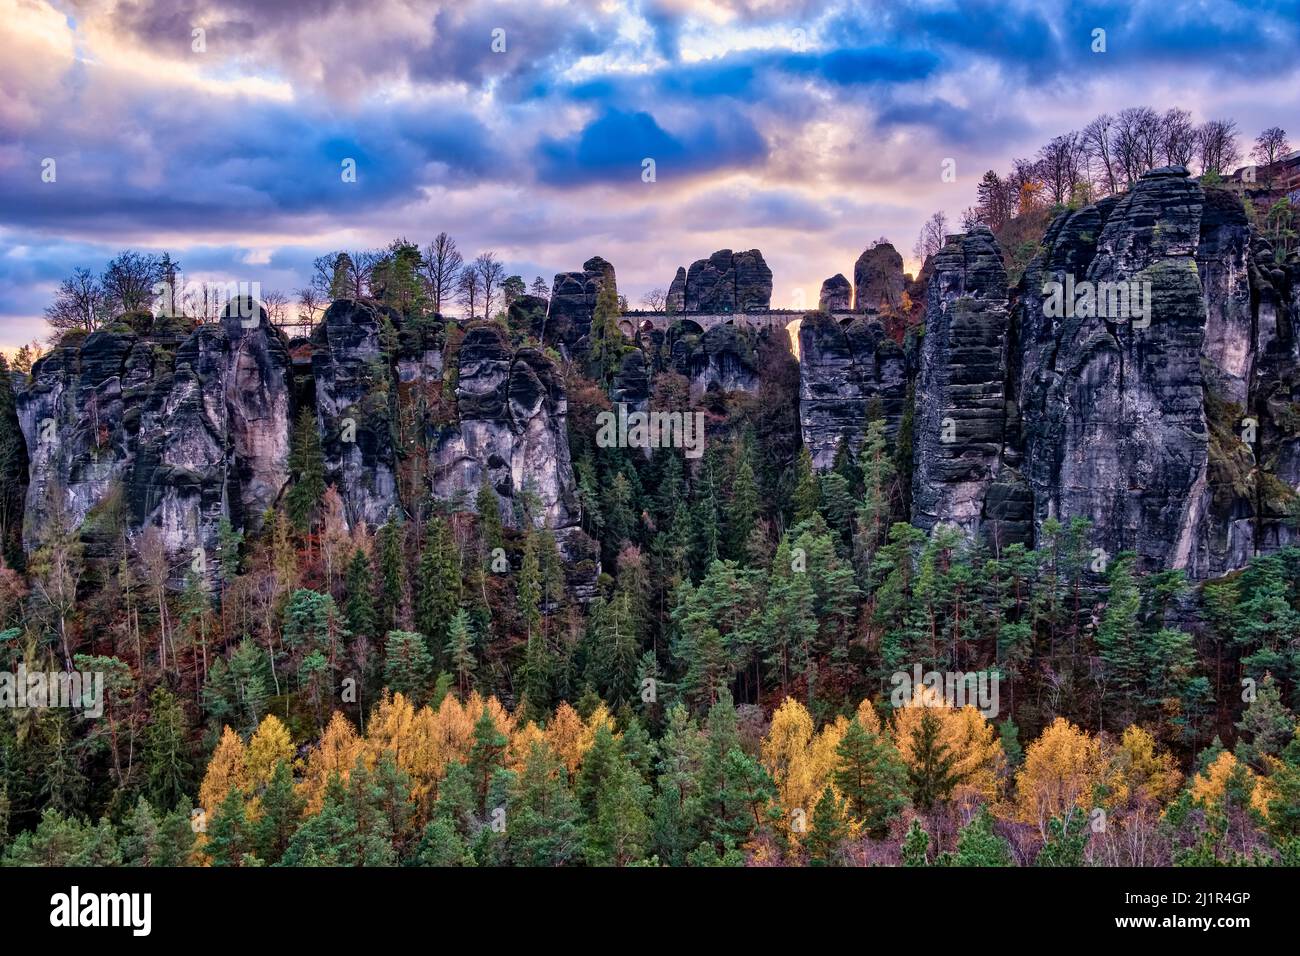 Landscape with the rock formations Felsenburg Neurathen and Bastei in Rathen area of the Saxon Switzerland National Park at sunset in autumn. Stock Photo